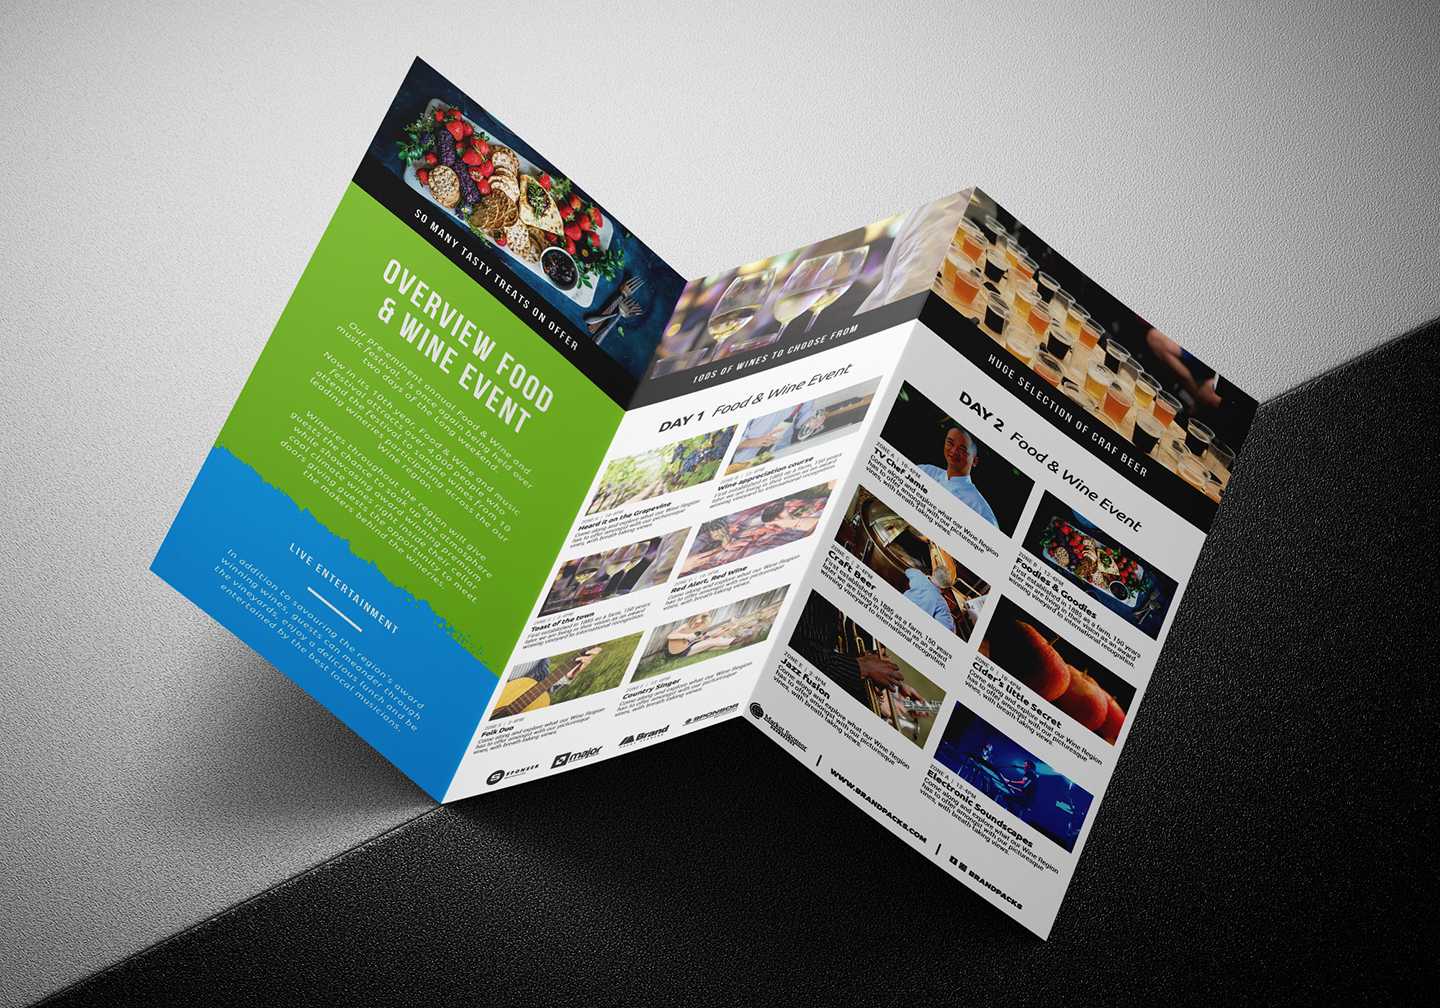 Free Tri Fold Brochure Template For Events & Festivals – Psd Intended For Free Online Tri Fold Brochure Template